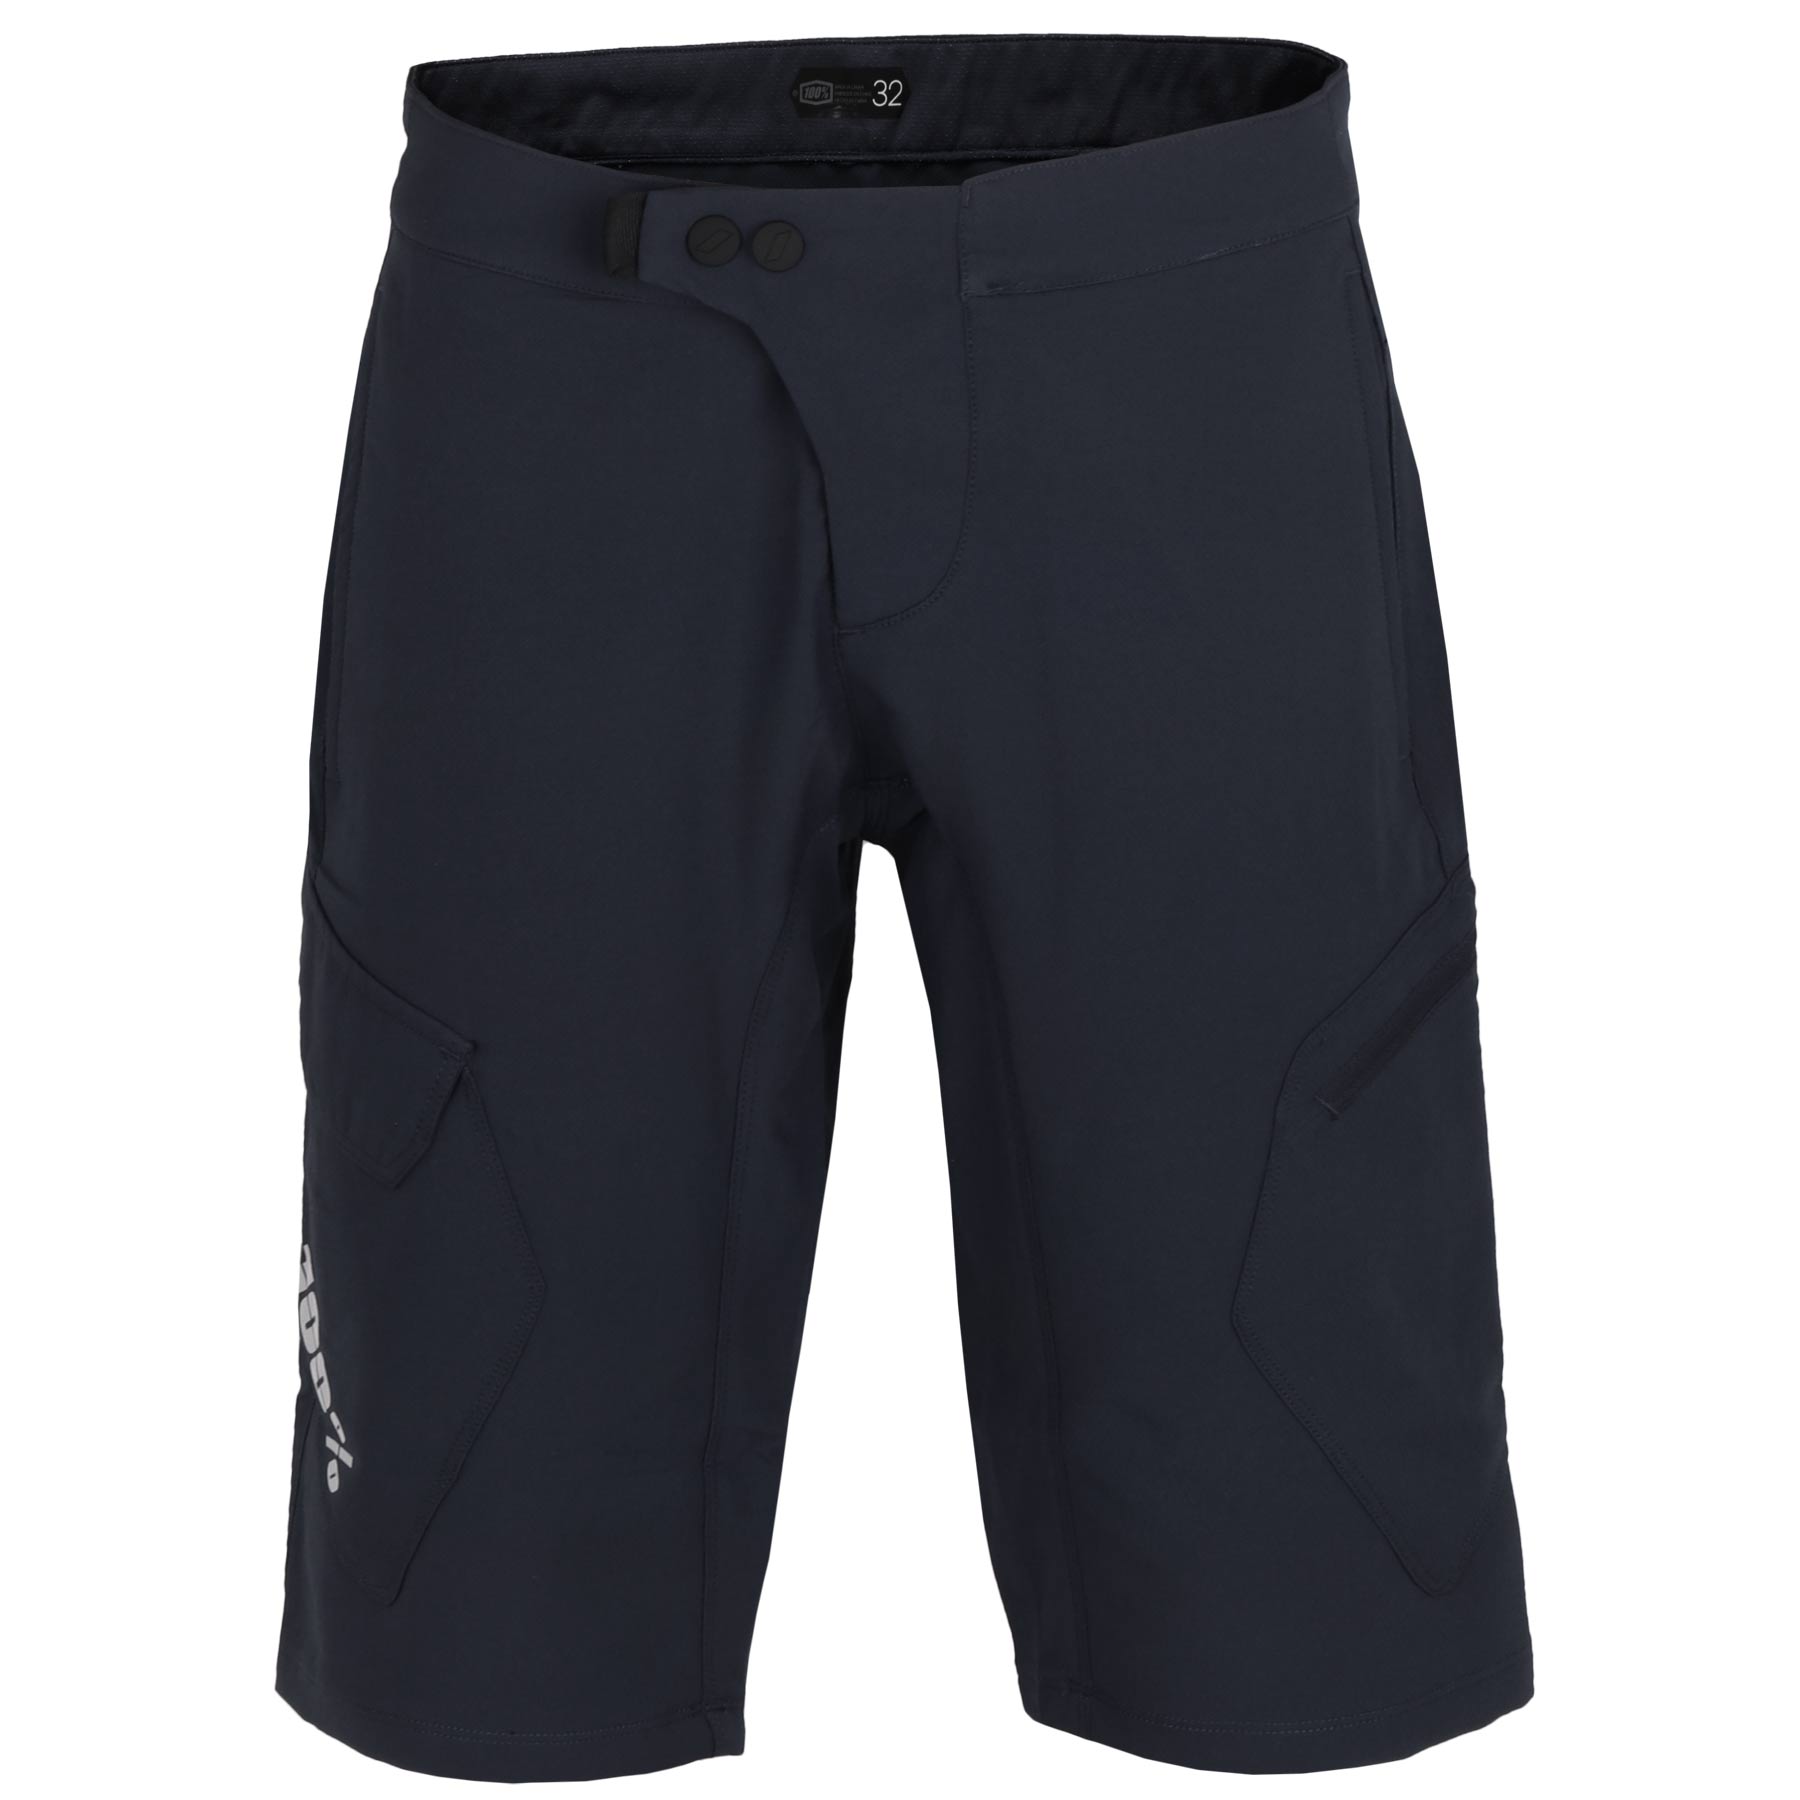 Picture of 100% Ridecamp Shorts - Black HU-SHO-2220/1